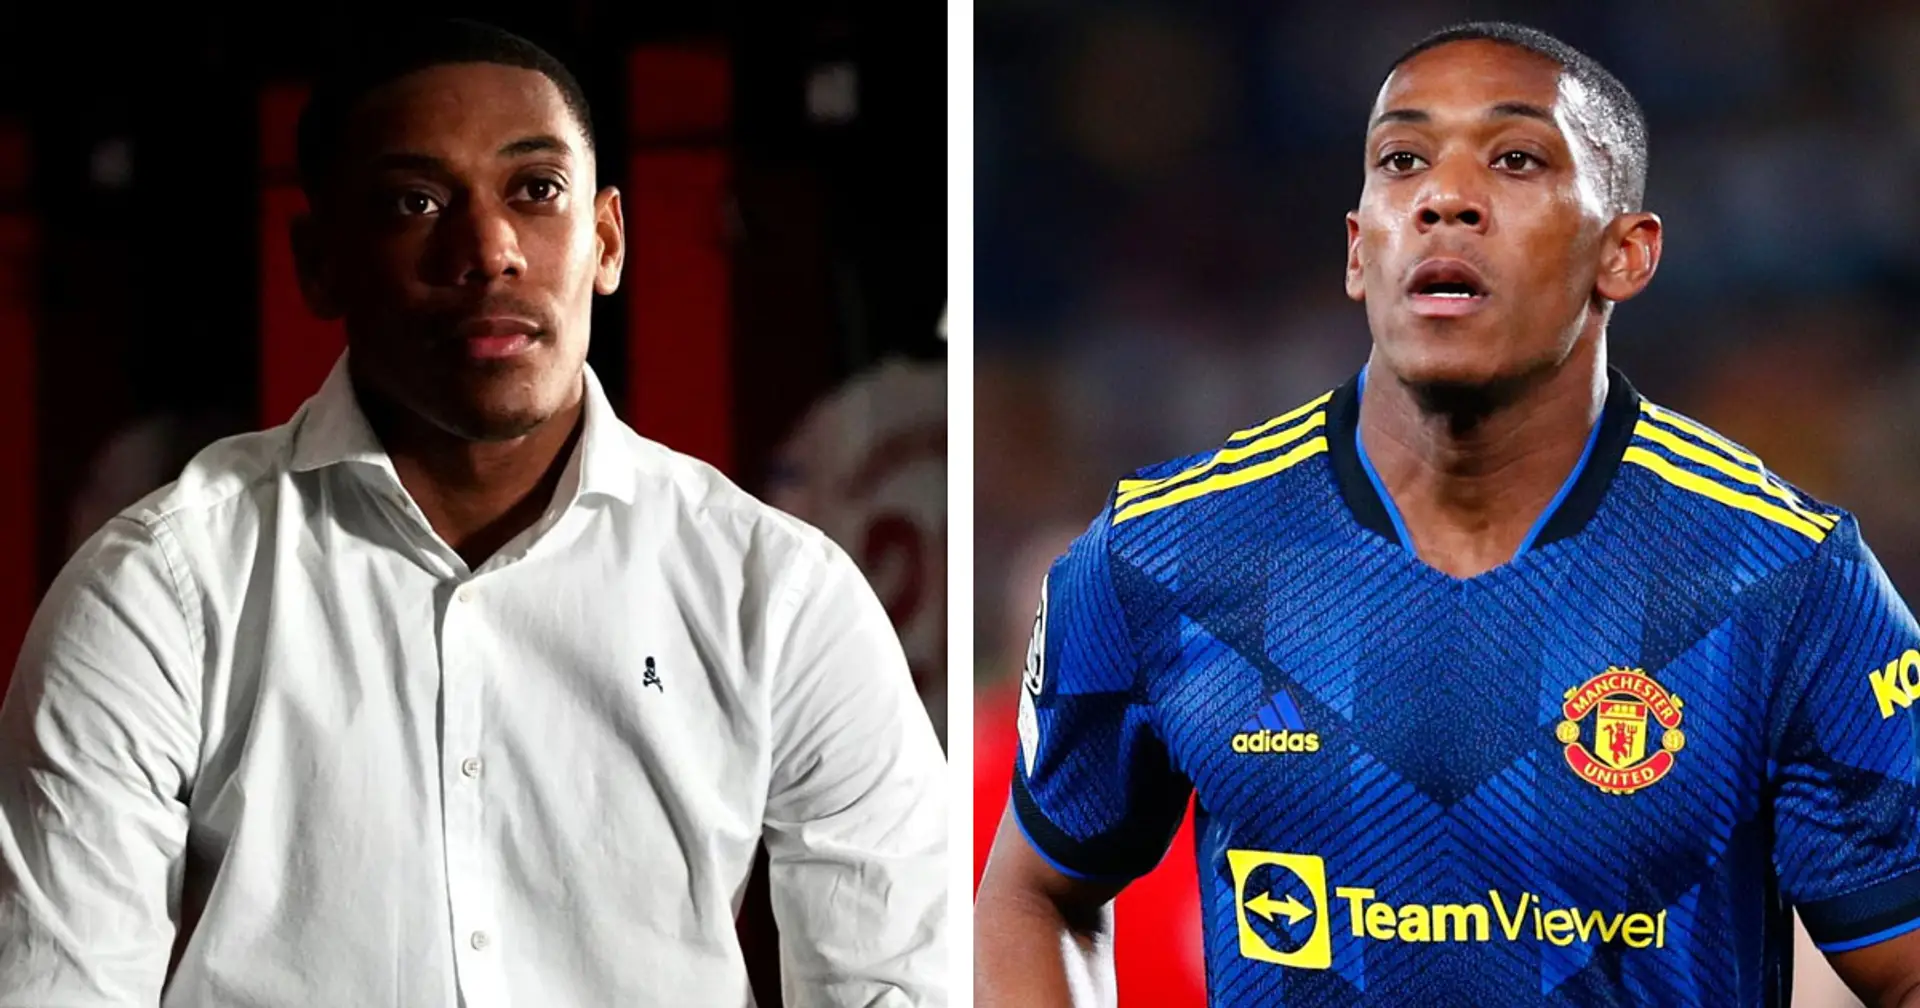 'I see it very complicated to be able to continue here': Martial opens up on his future amid struggles at Sevilla